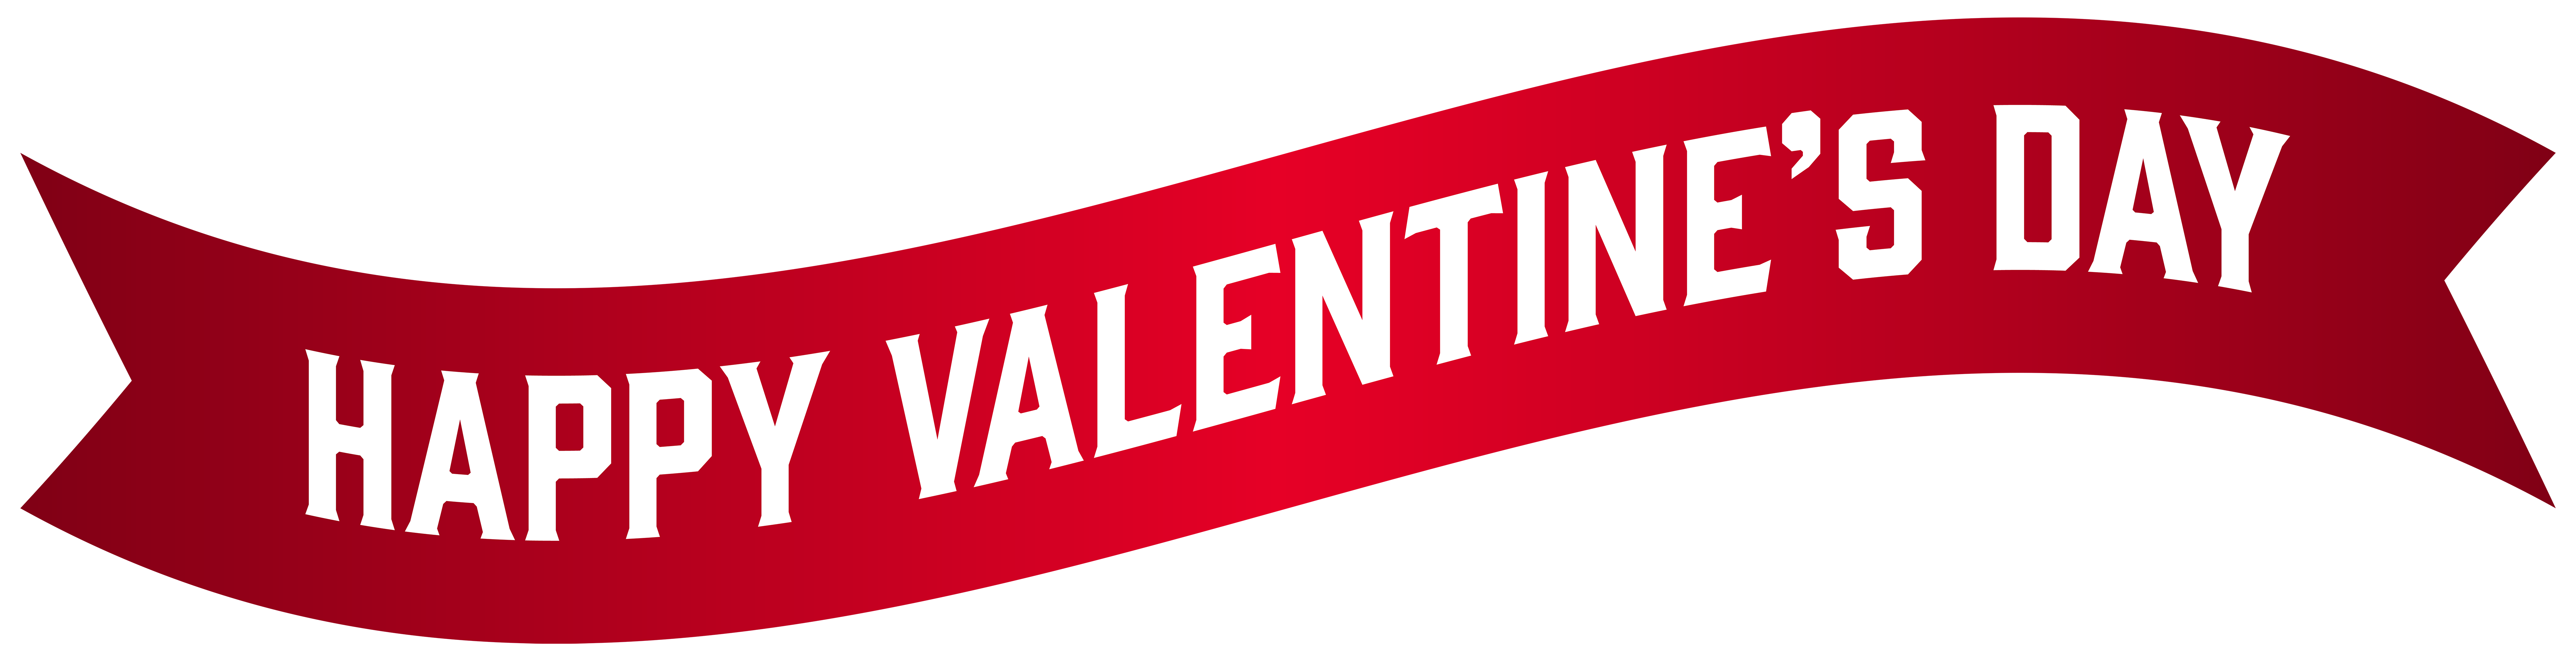 valentine's day banners clipart - photo #12